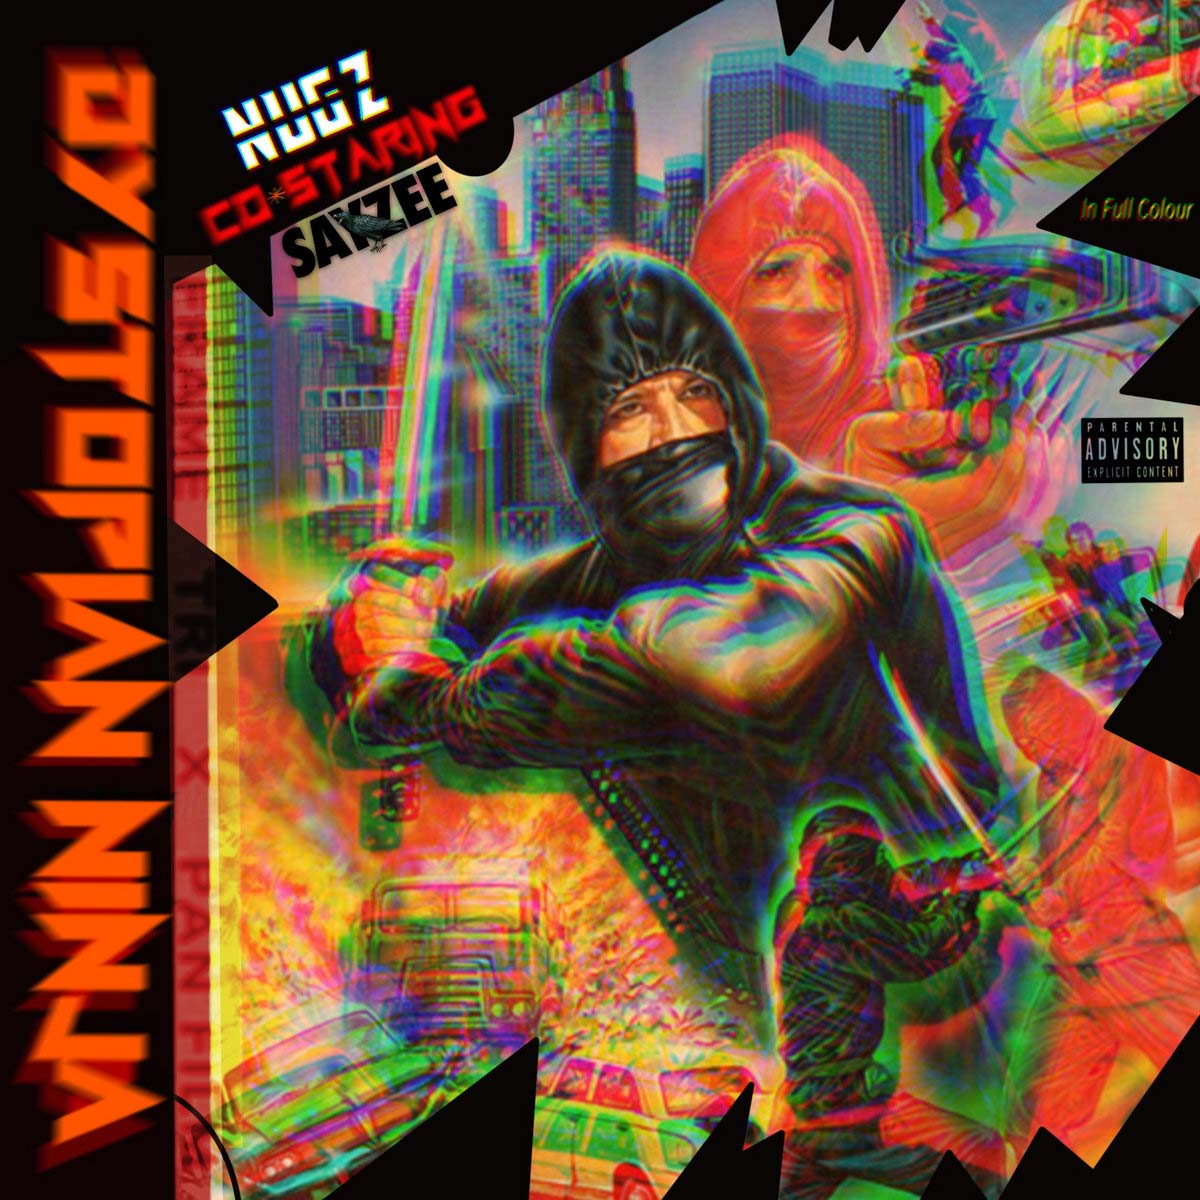 Artwork for the Nugz Presents: Dystopian Ninja EP by Sayzee